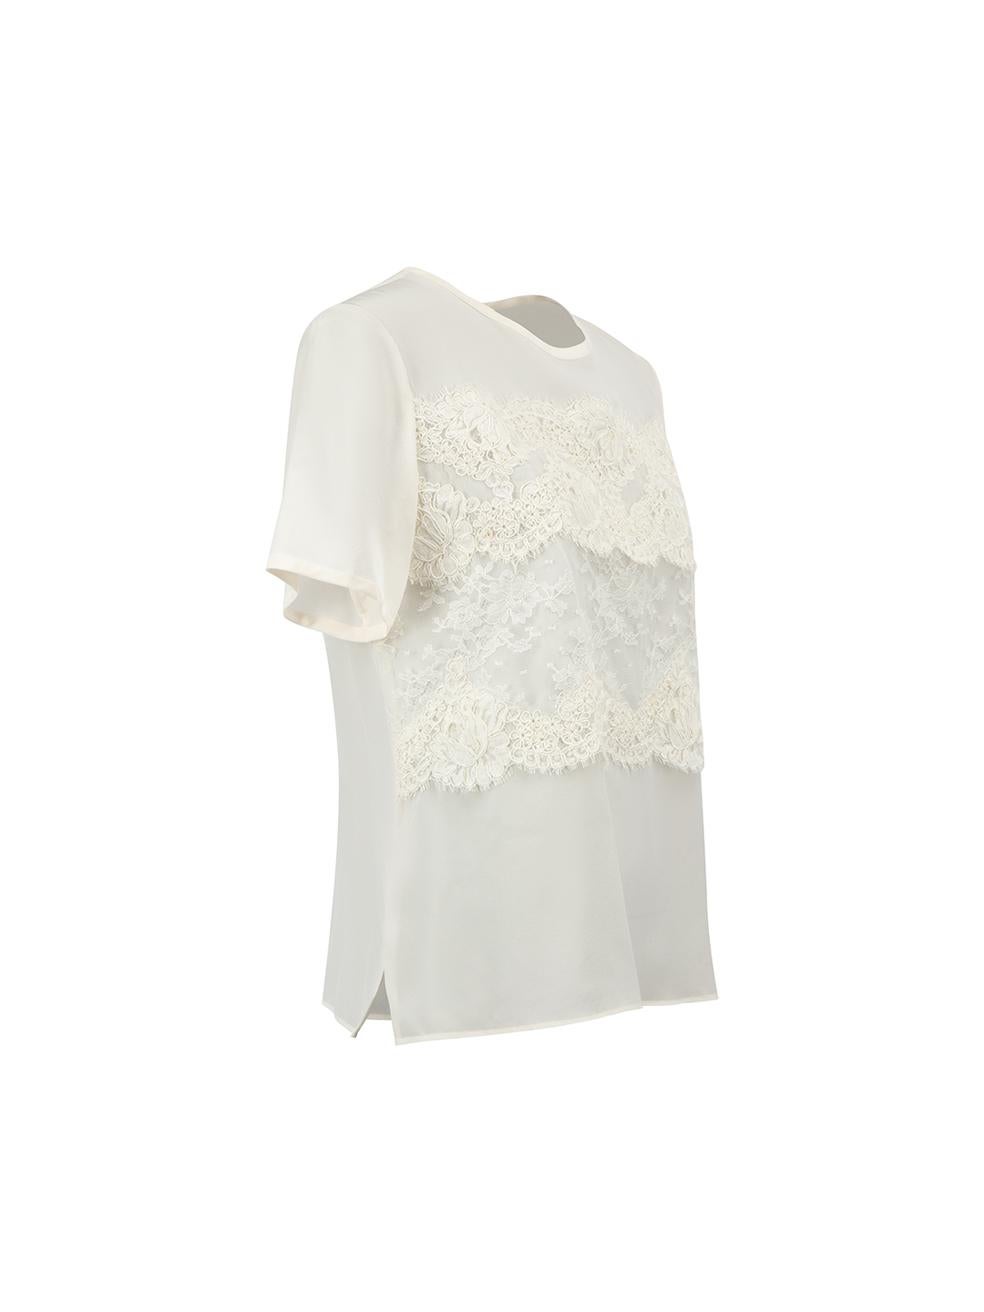 CONDITION is Good. Minor wear to top is evident. Light wear to fabric with small mark at centre front and small marks on lace overlay of this used Oscar de la Renta designer resale item. We recommend dry-cleaning this item before